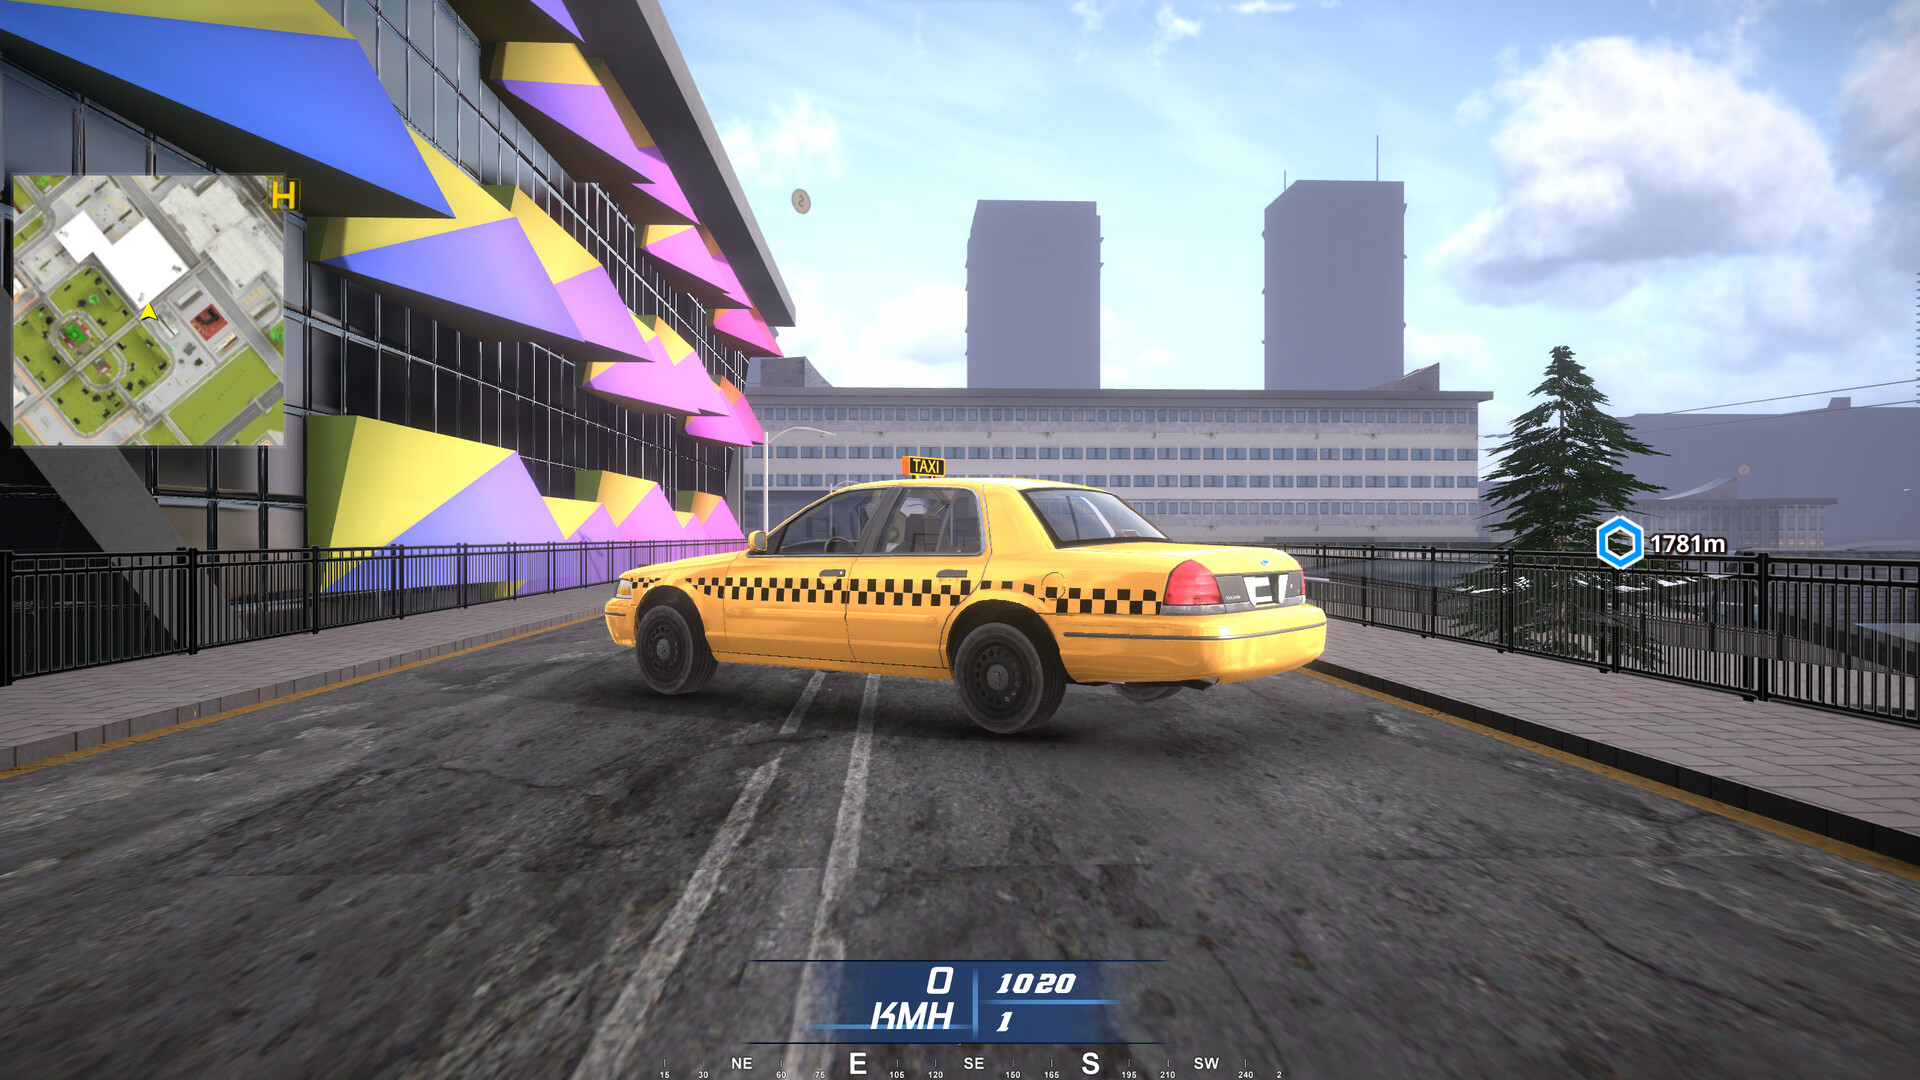 Taxi Simulator in City on Steam